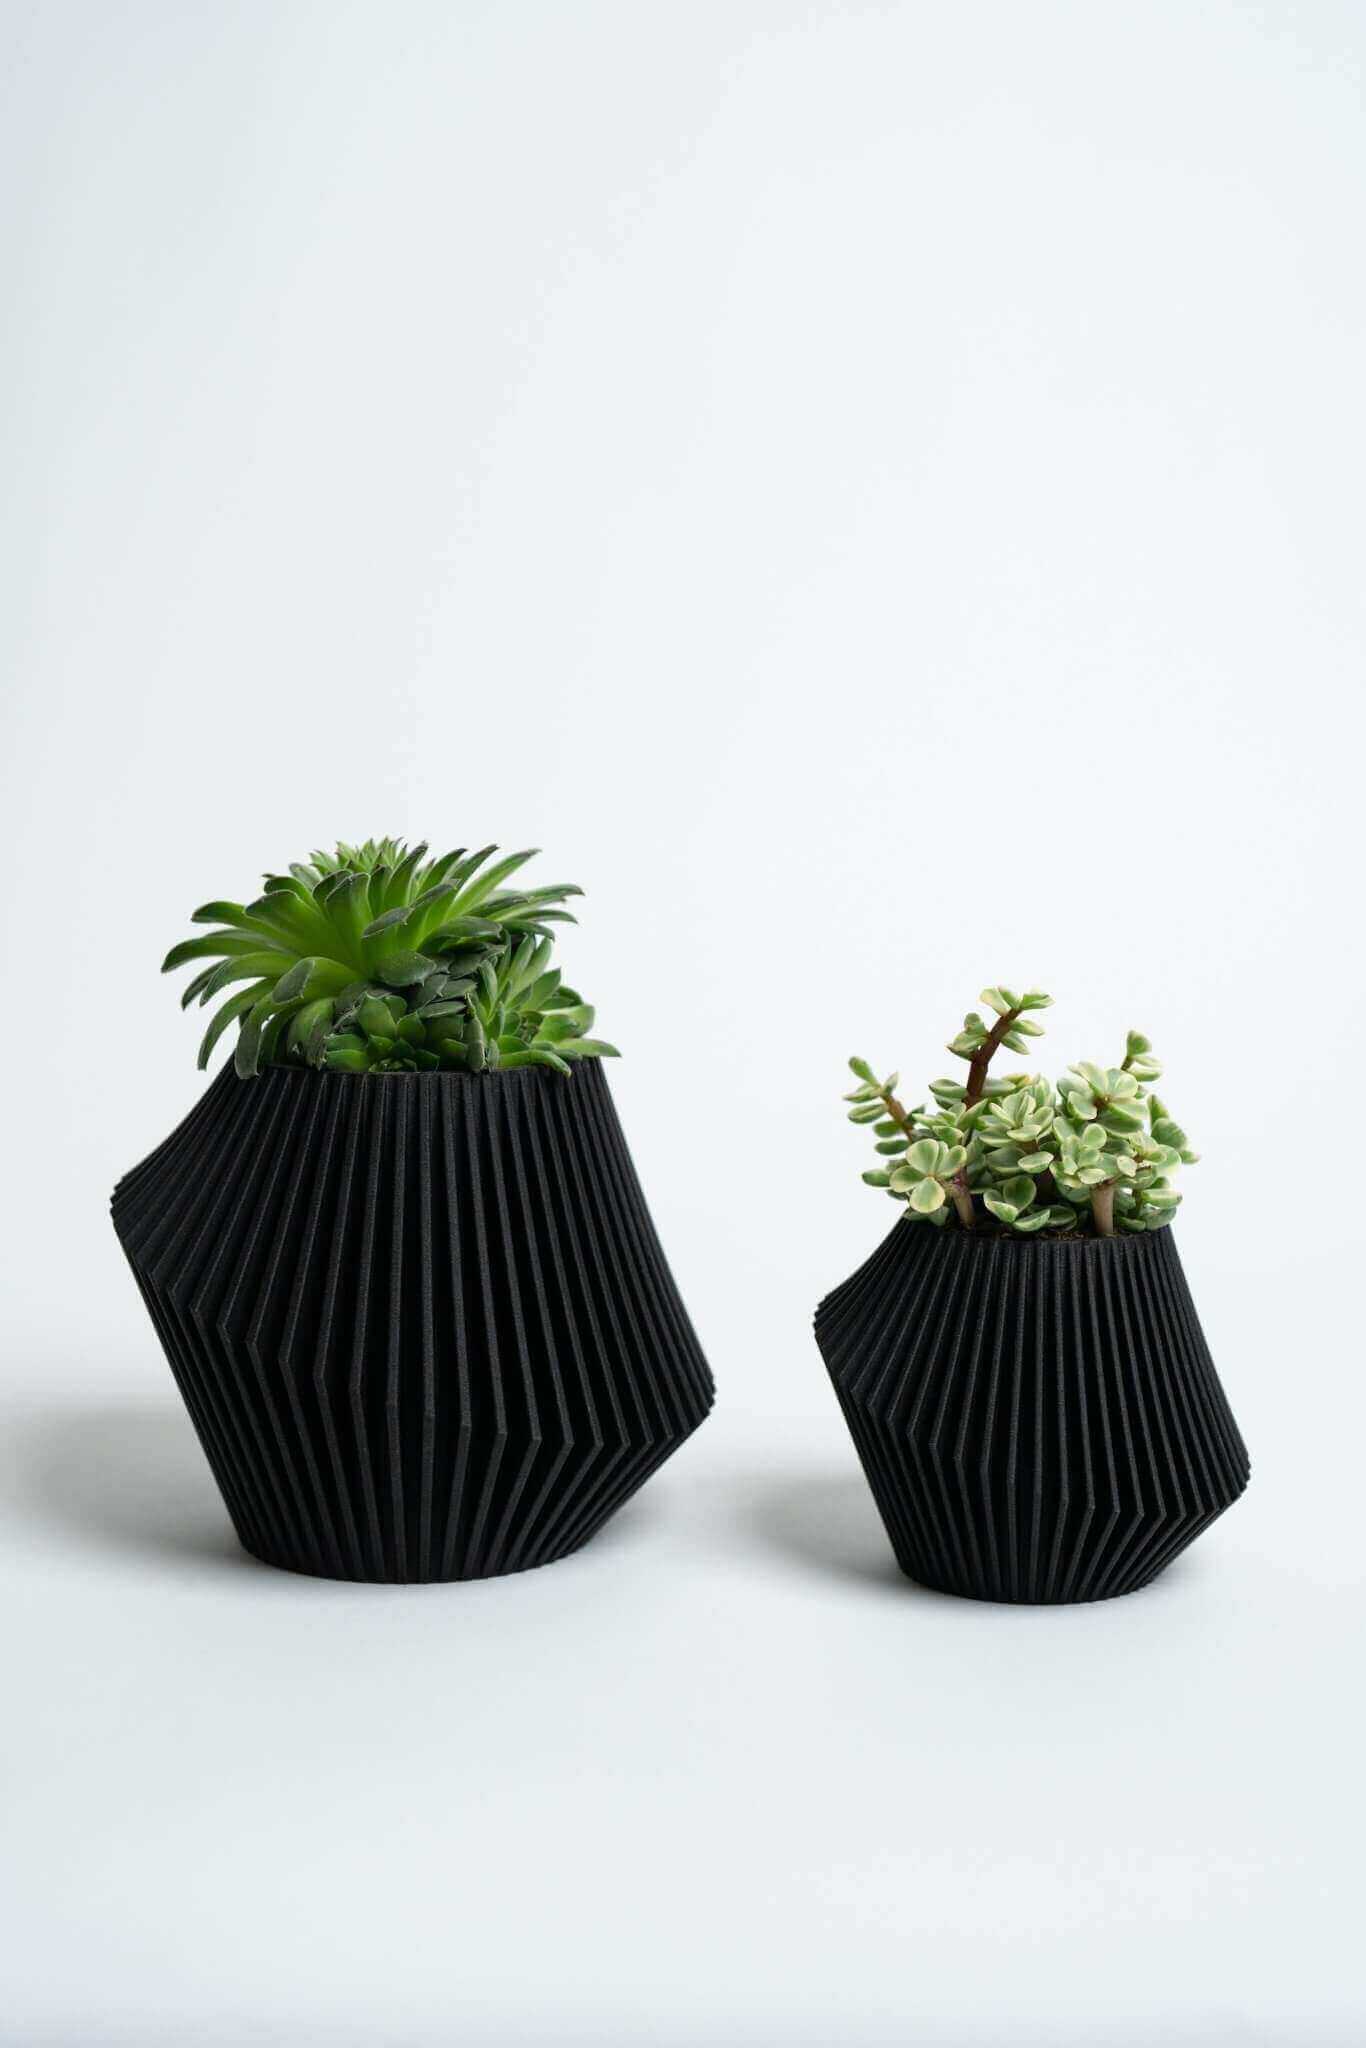 Black Flower Pot | Black Modern Planters by Woodland Pulse. Two pots for planting succulents with green succulents inside.